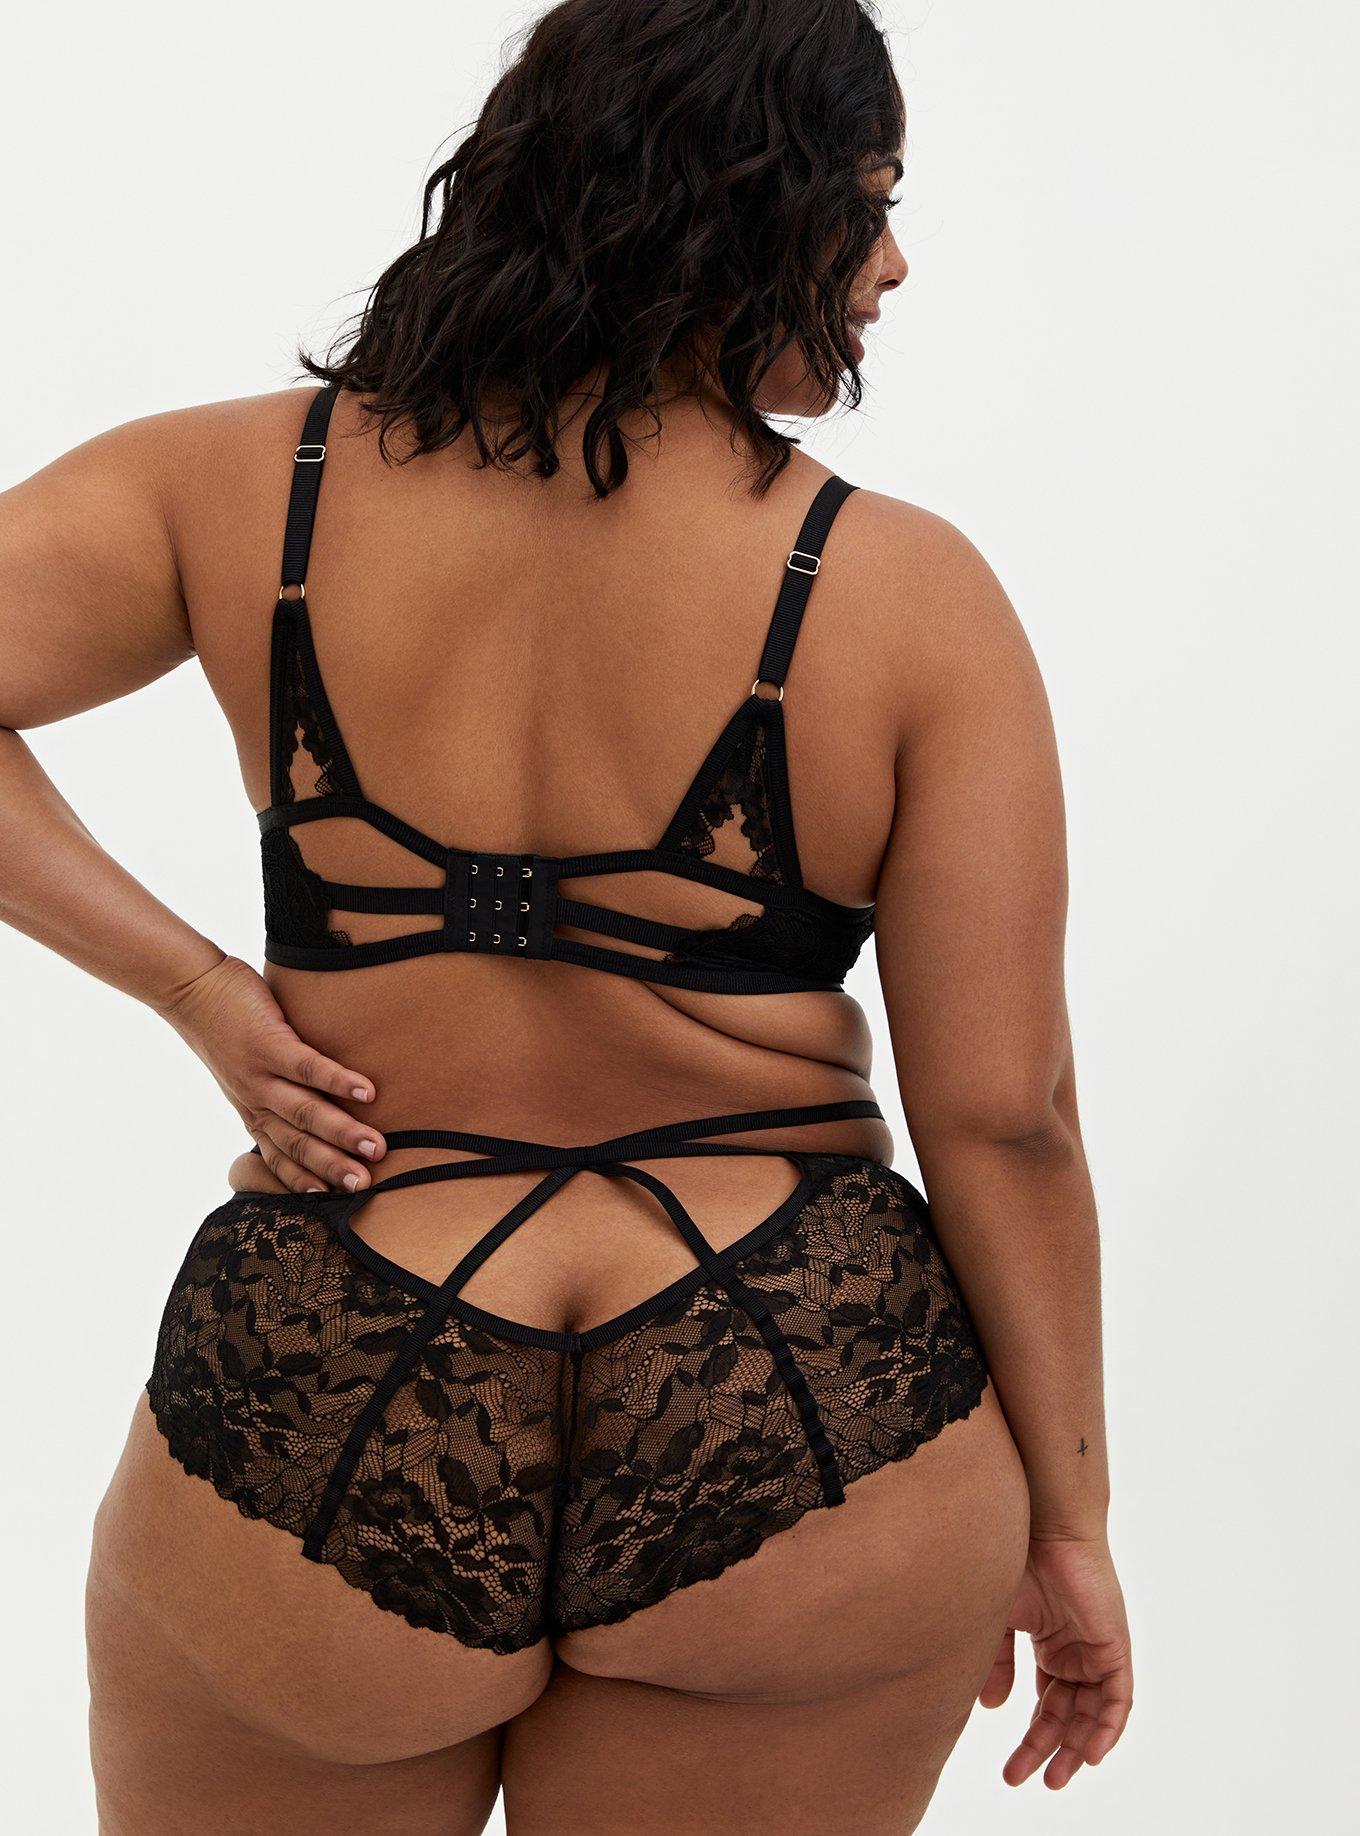 Plus Size - Black Strappy Chantilly Lace Open Back Cheeky Panty - Torrid